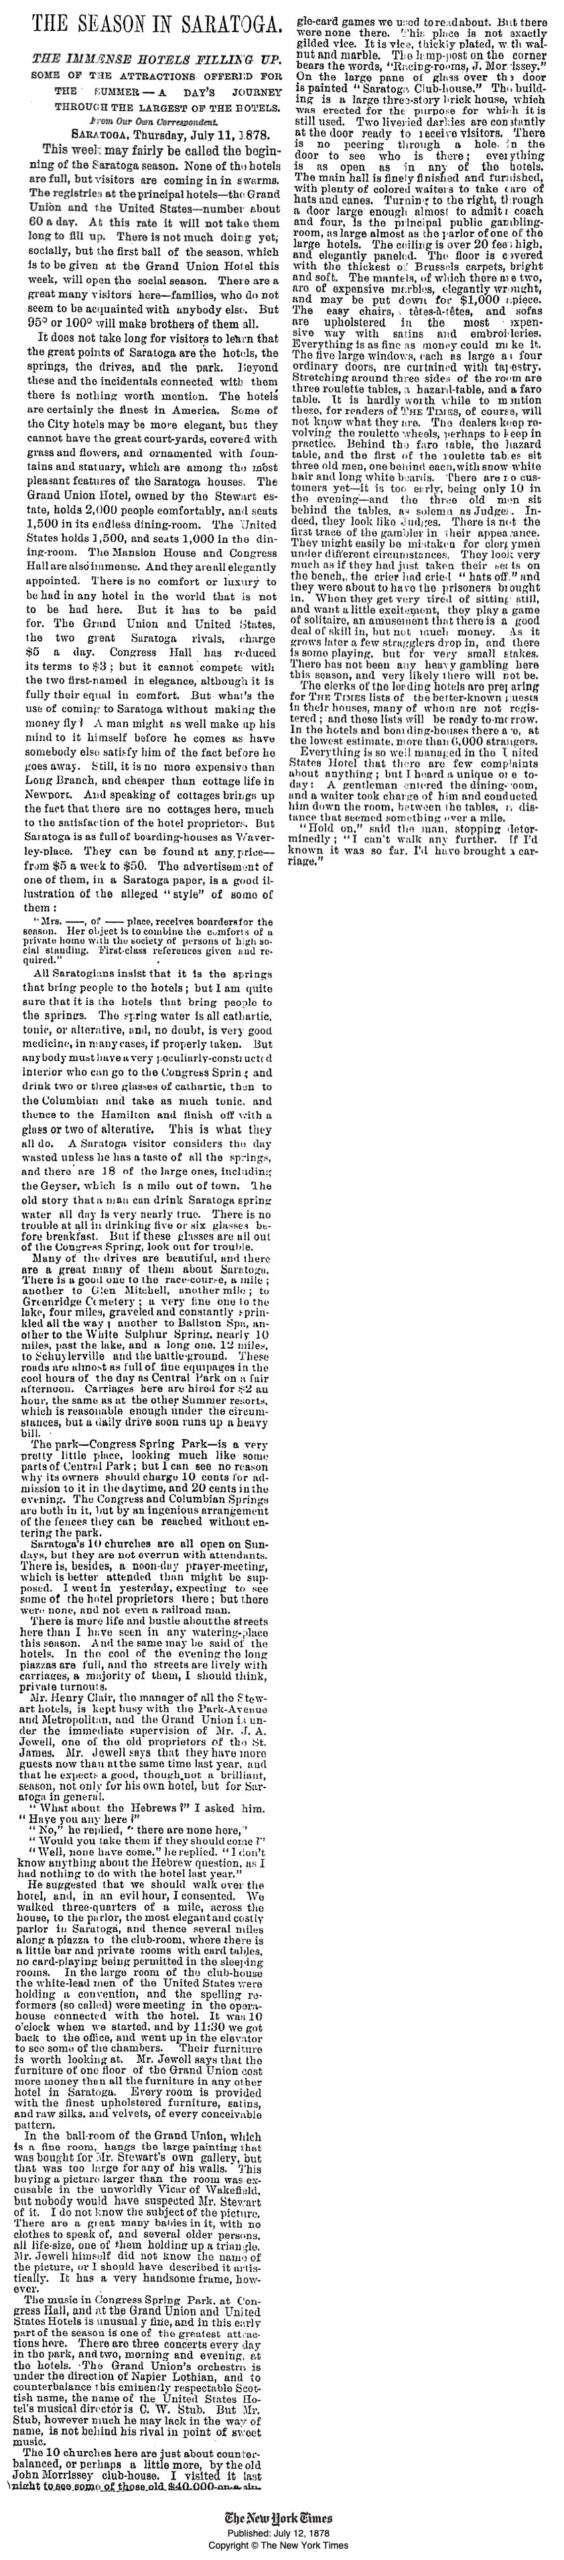 Article about The Season in Saratoga in The New York Times - 1878 where solitaire is played in John Morrisey's Gambling House